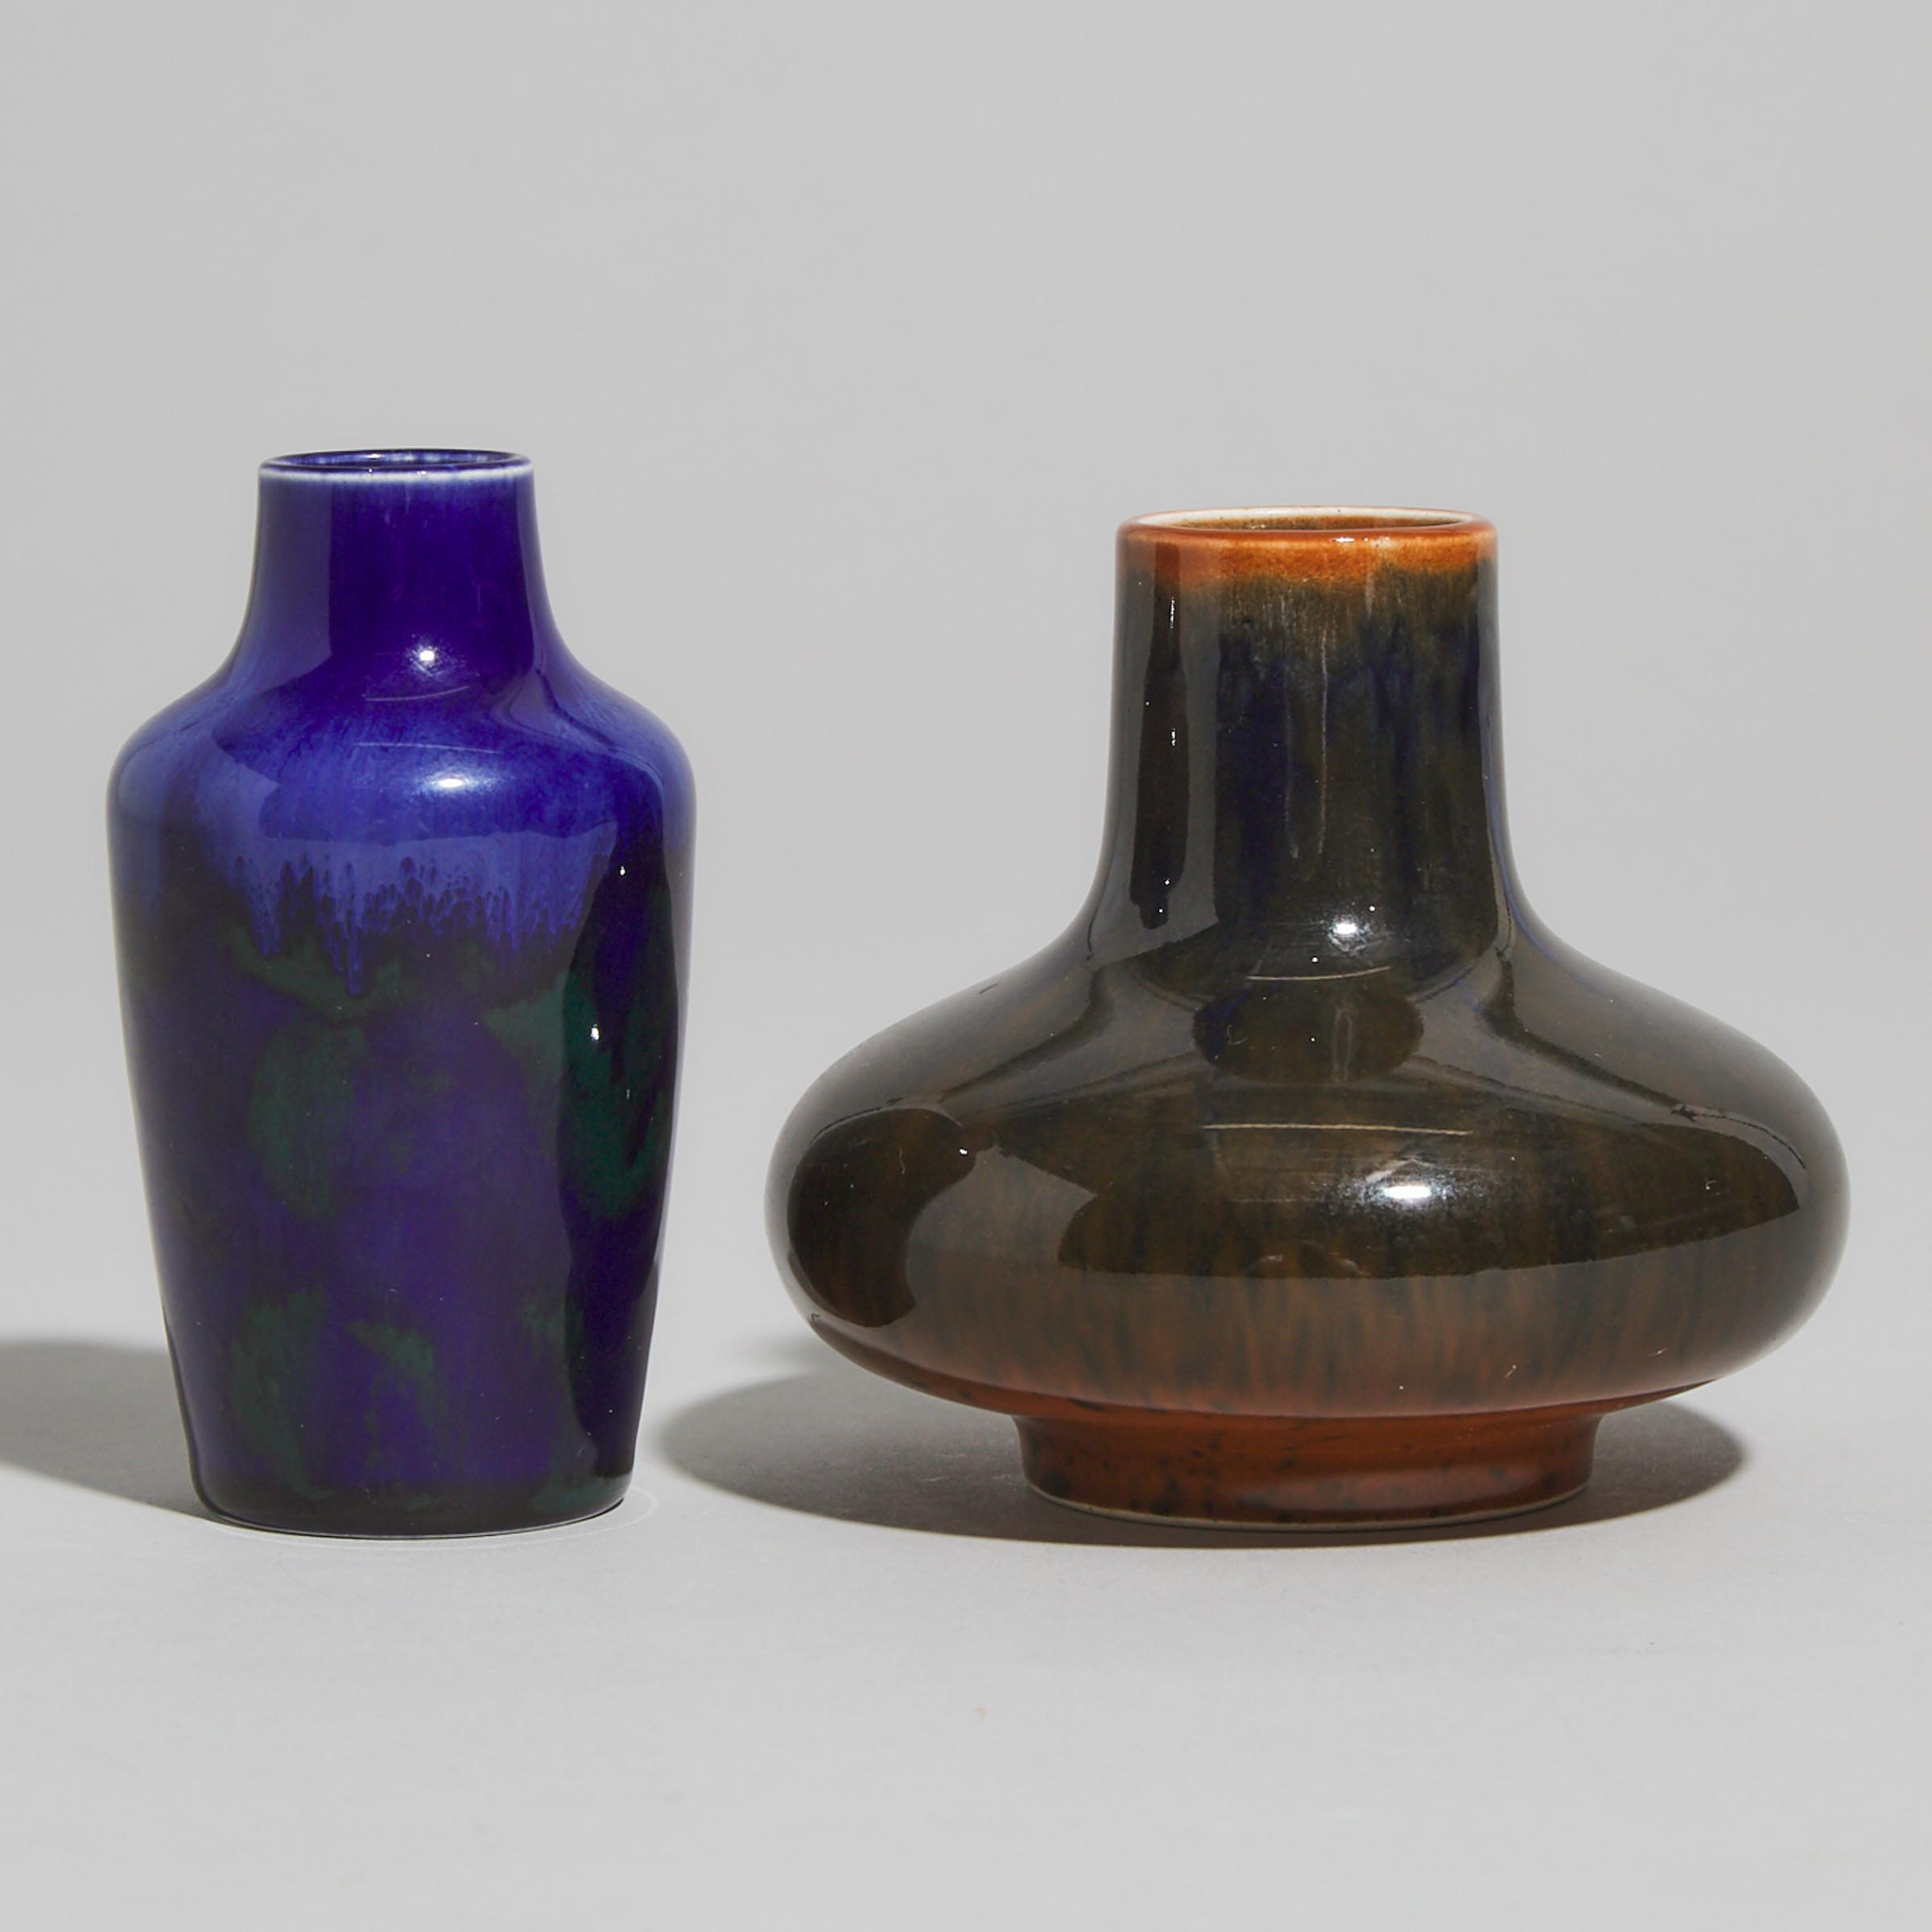 Two Small Ruskin Vases, early 20th century